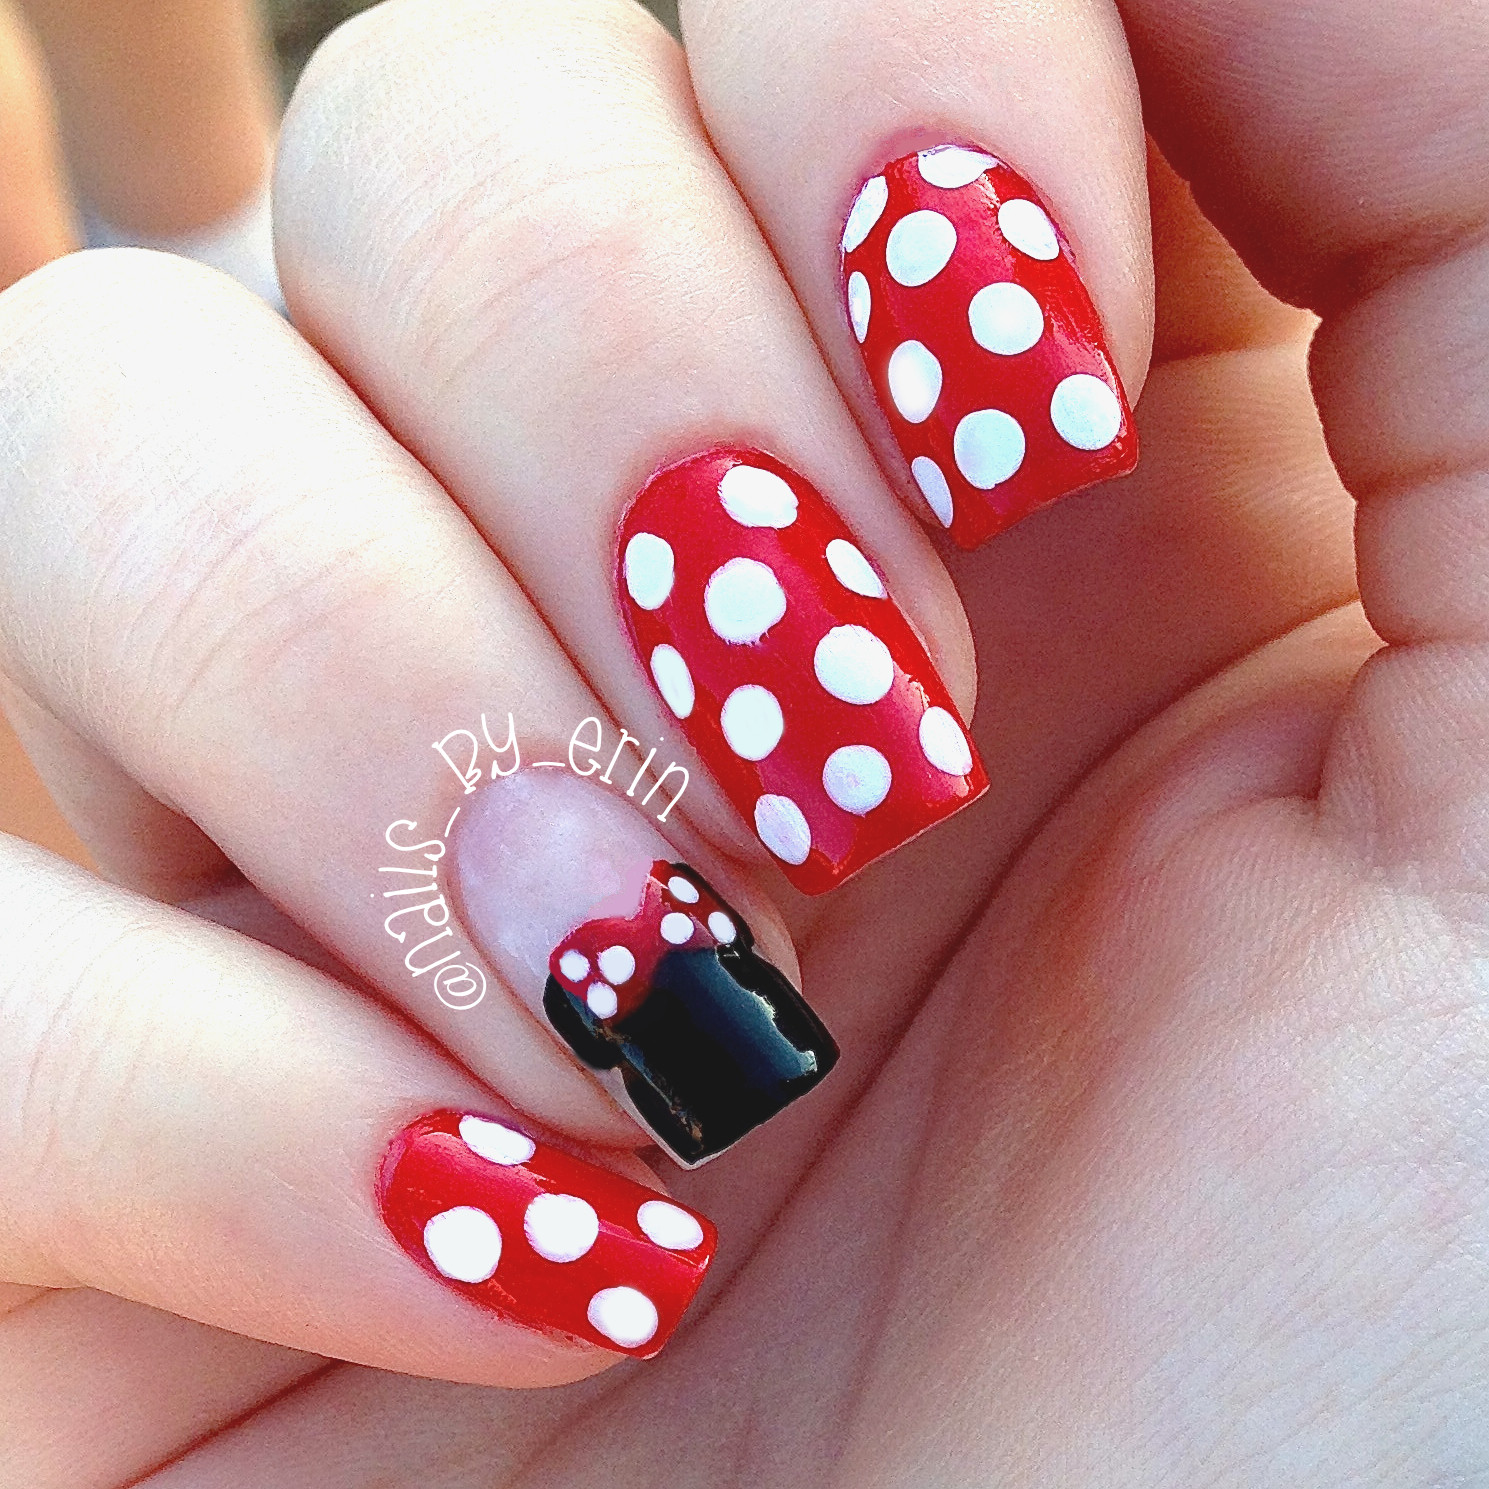 Minnie Mouse Nail Designs
 NailsByErin Minnie Mouse Nails